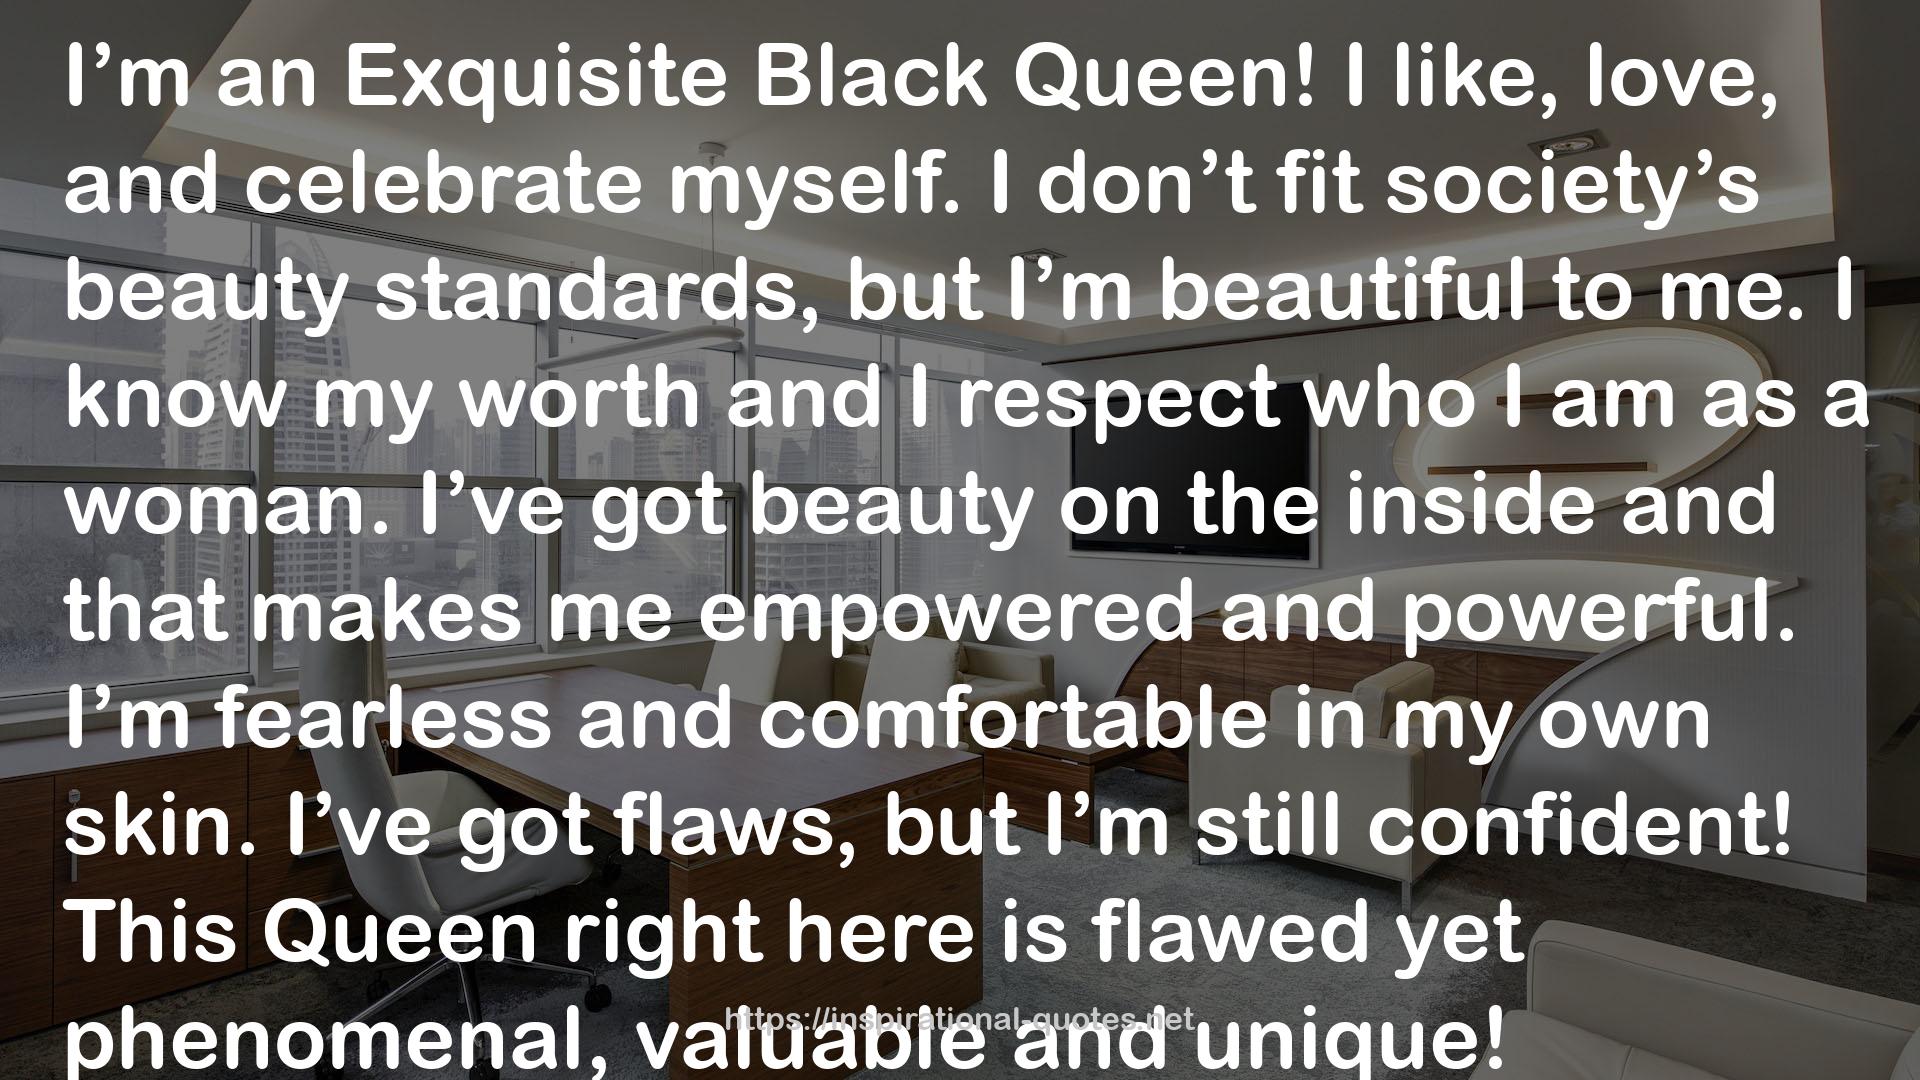 Stephanie Lahart quote : I’m an Exquisite Black Queen! I like, love, and celebrate myself. I don’t fit society’s beauty standards, but I’m beautiful to me. I know my worth and I respect who I am as a woman. I’ve got beauty on the inside and that makes me empowered and powerful. I’m fearless and comfortable in my own skin. I’ve got flaws, but I’m still confident! This Queen right here is flawed yet phenomenal, valuable and unique!